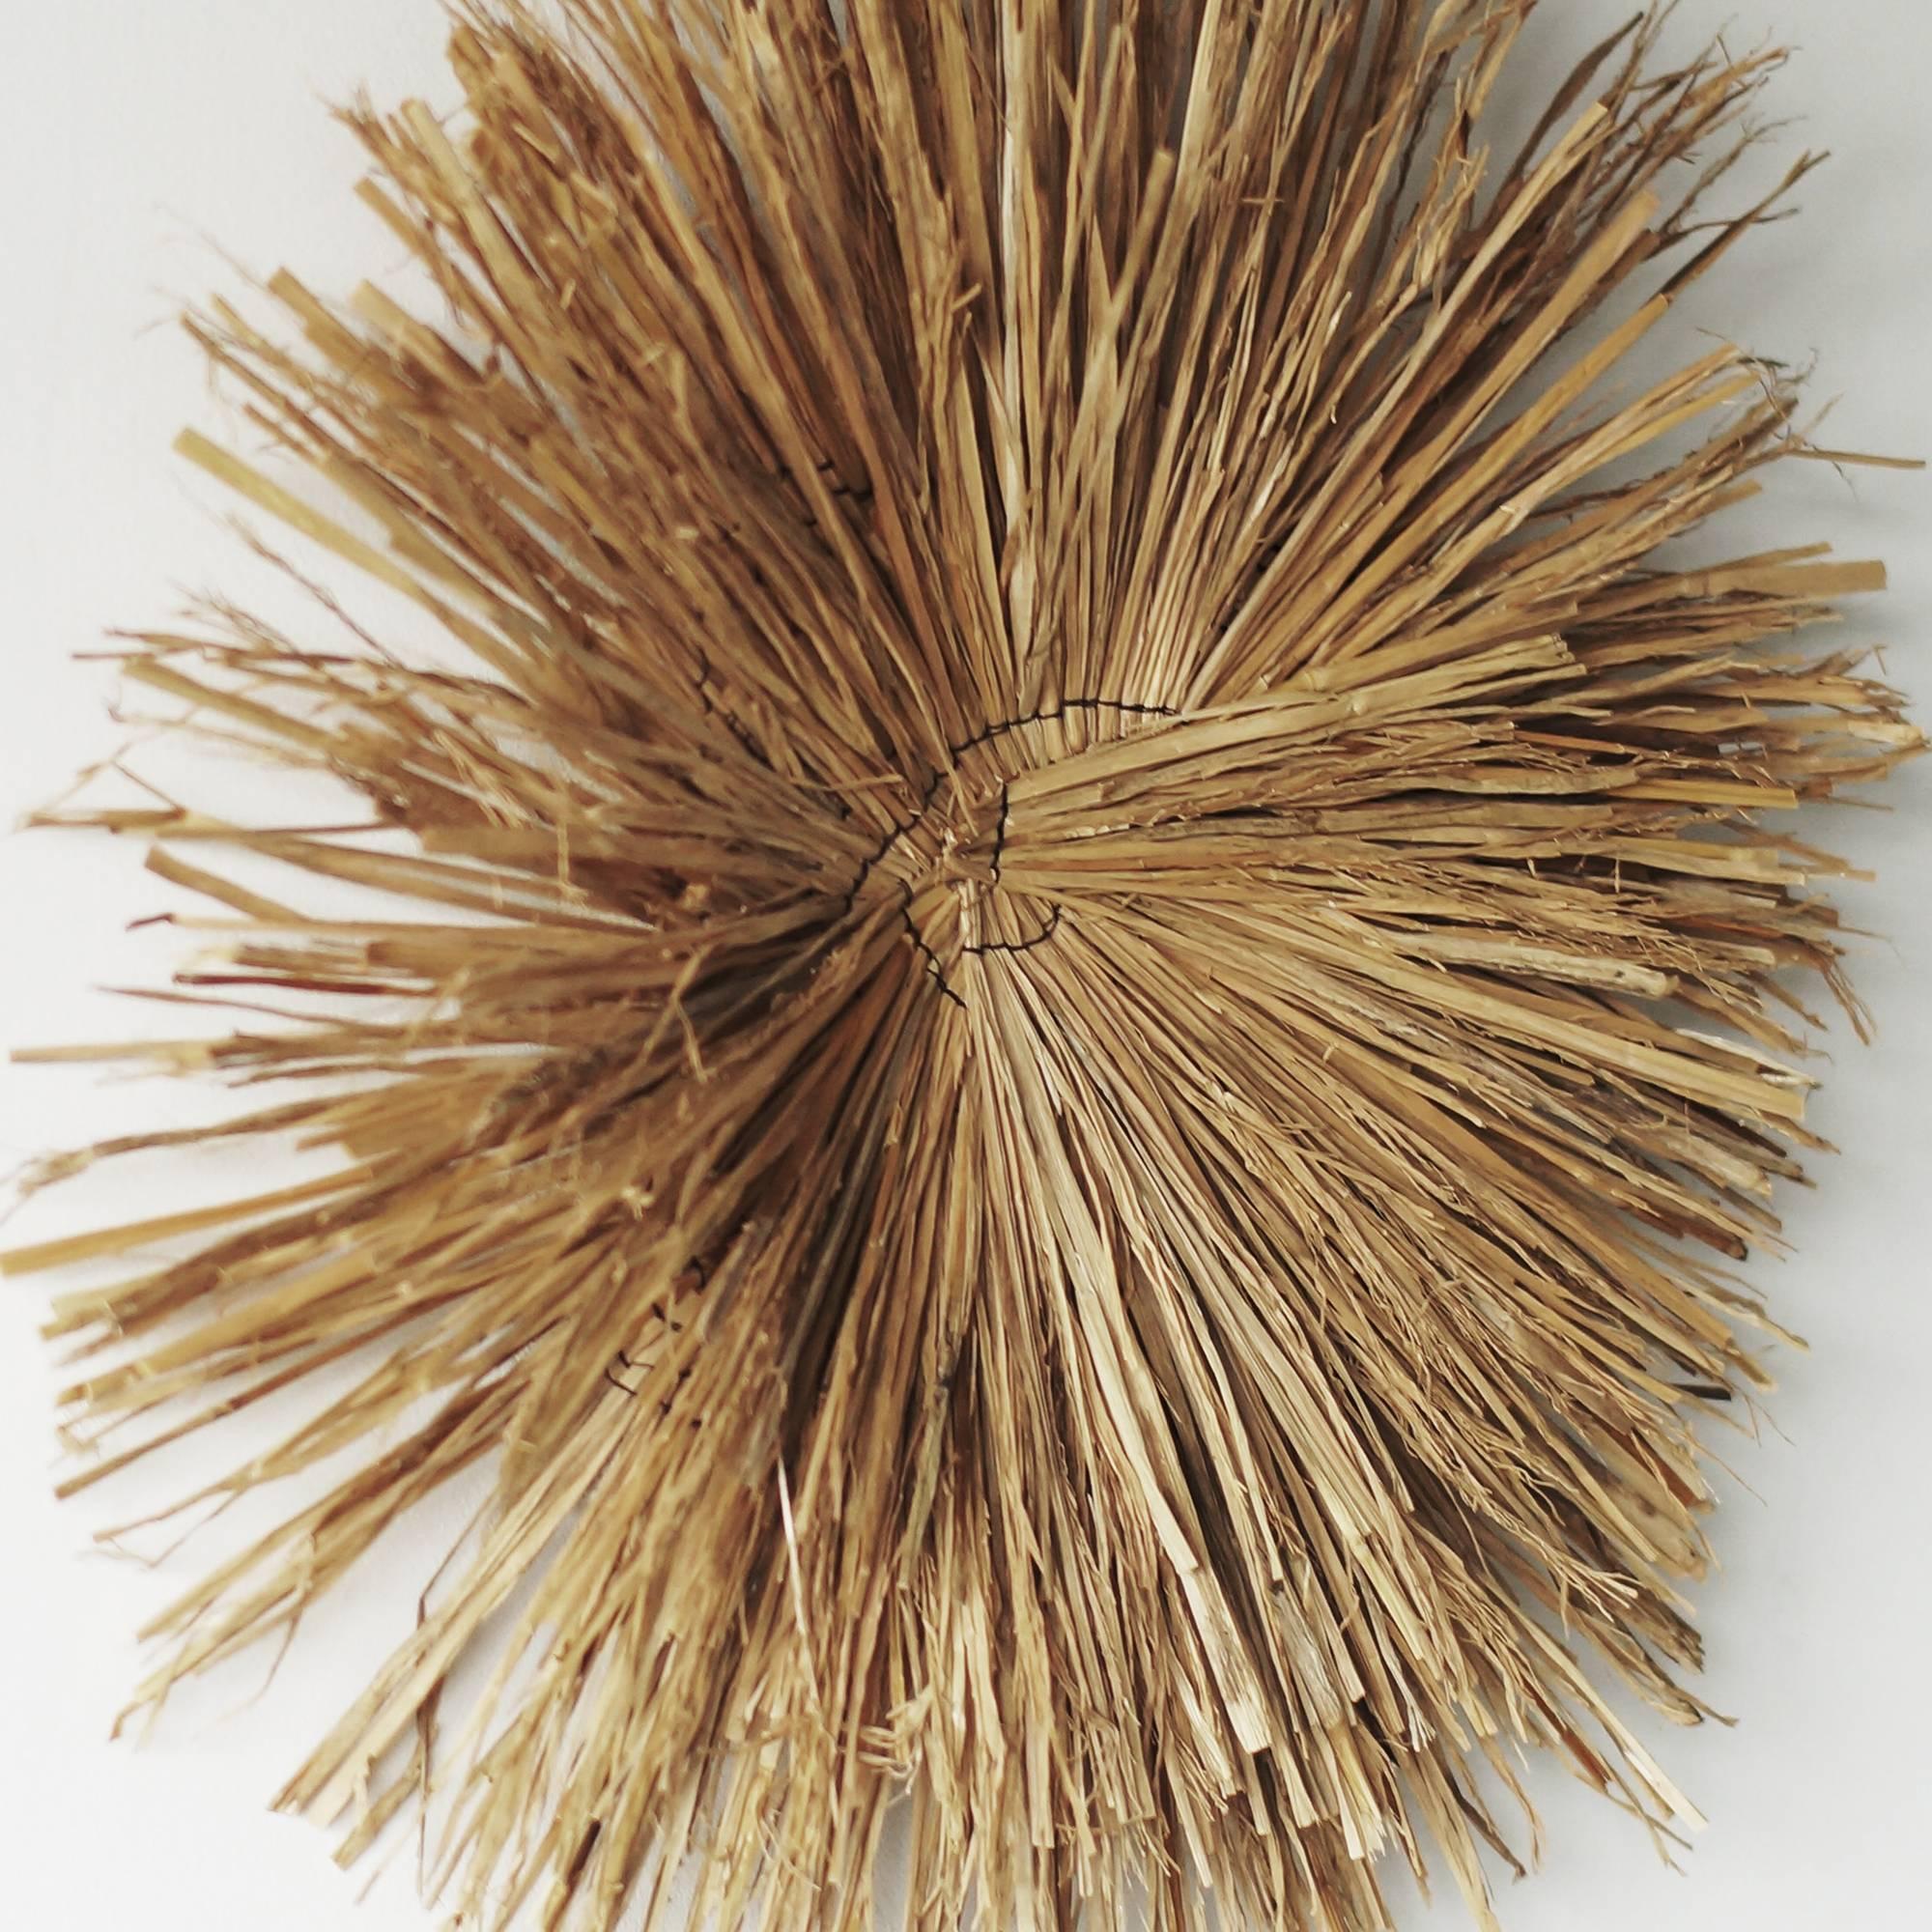 Hand-sewed straw art by Arko. This work has the feelings of contemporary primitive art, tribal art, contemporary craft art, created with the respect for wild nature.
Arko is a finalist of the Loewe craft prize 2018